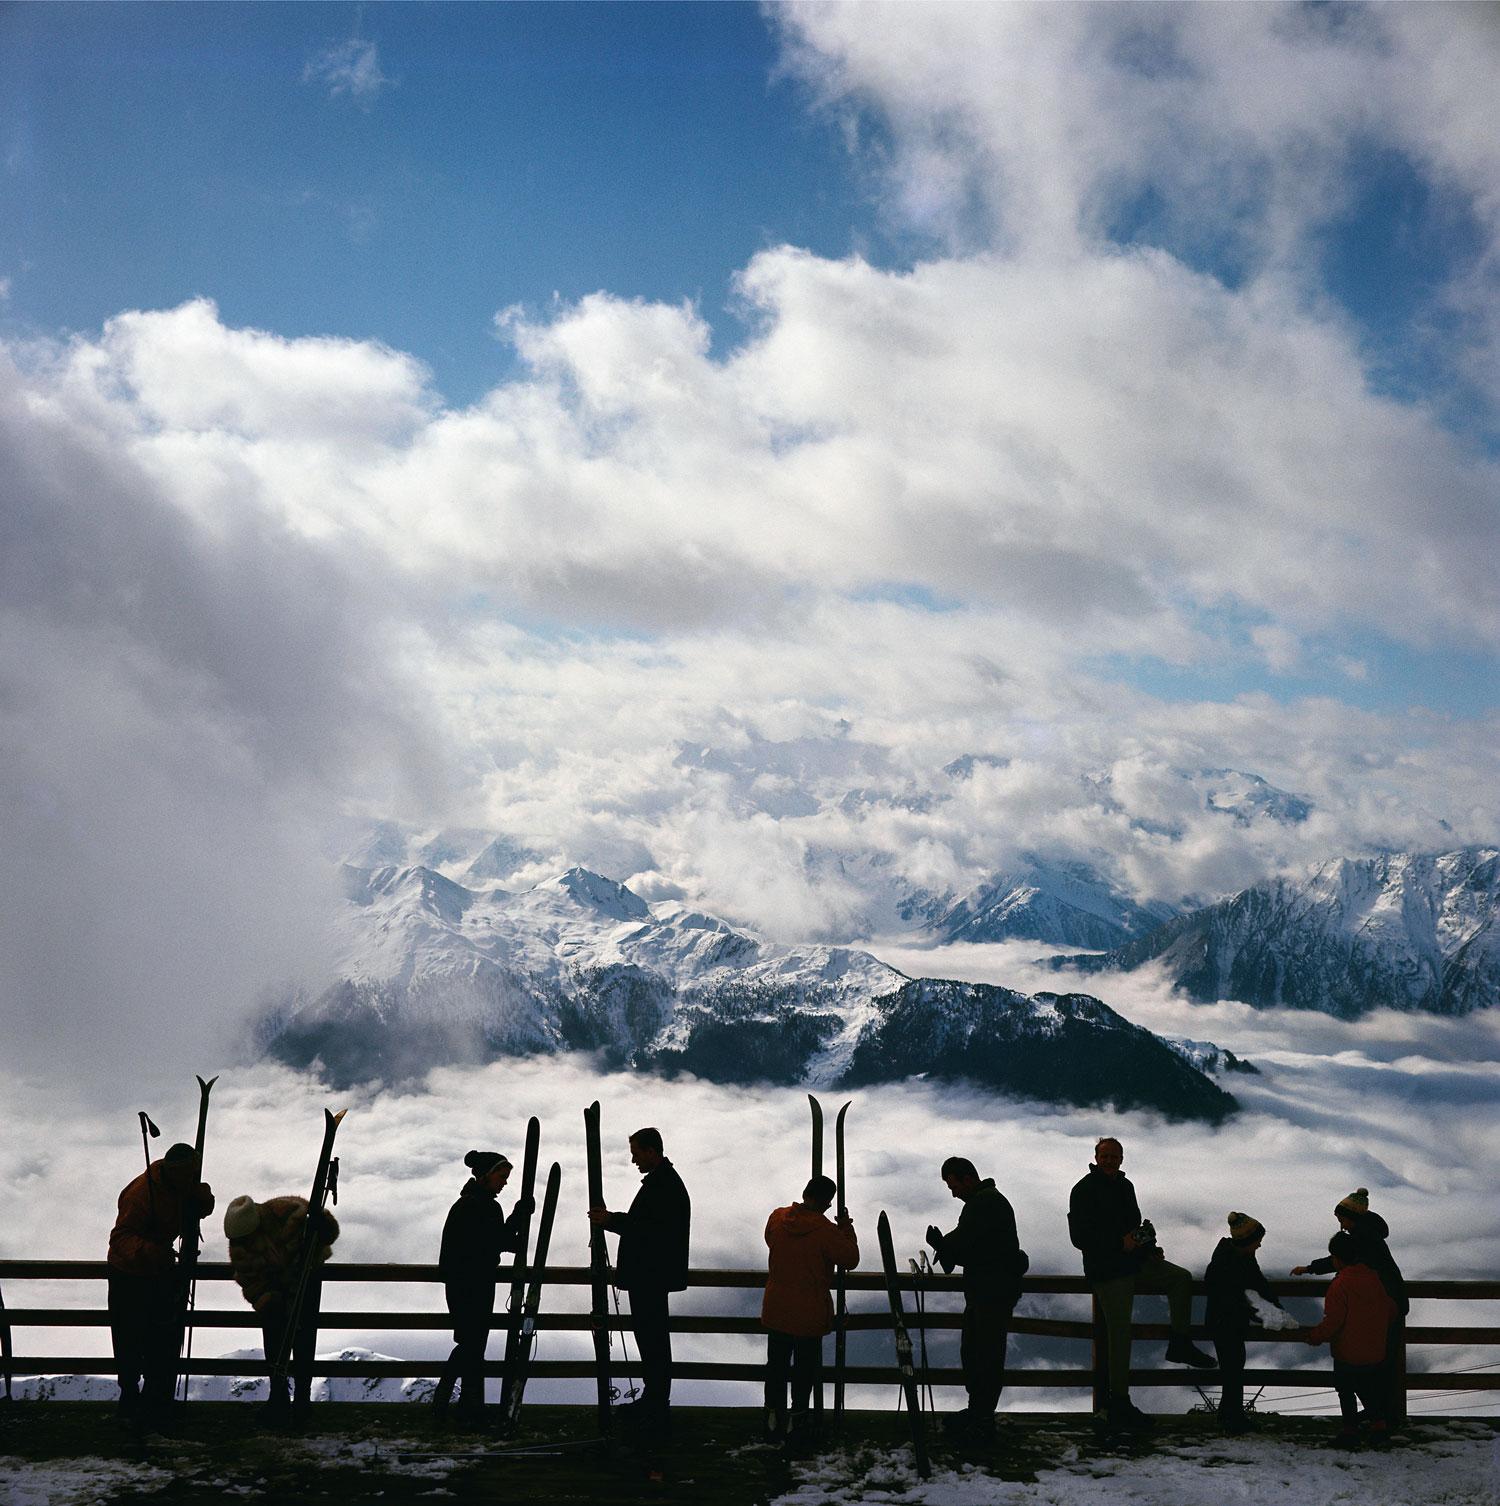 Klosters
1963
C-Print
Estate signature stamped and hand numbered edition of 150 with certificate of authenticity from the estate.   

Skiers admire the view across a valley of clouds at Verbier, 1964. (Photo by Slim Aarons/Hulton Archive/Getty